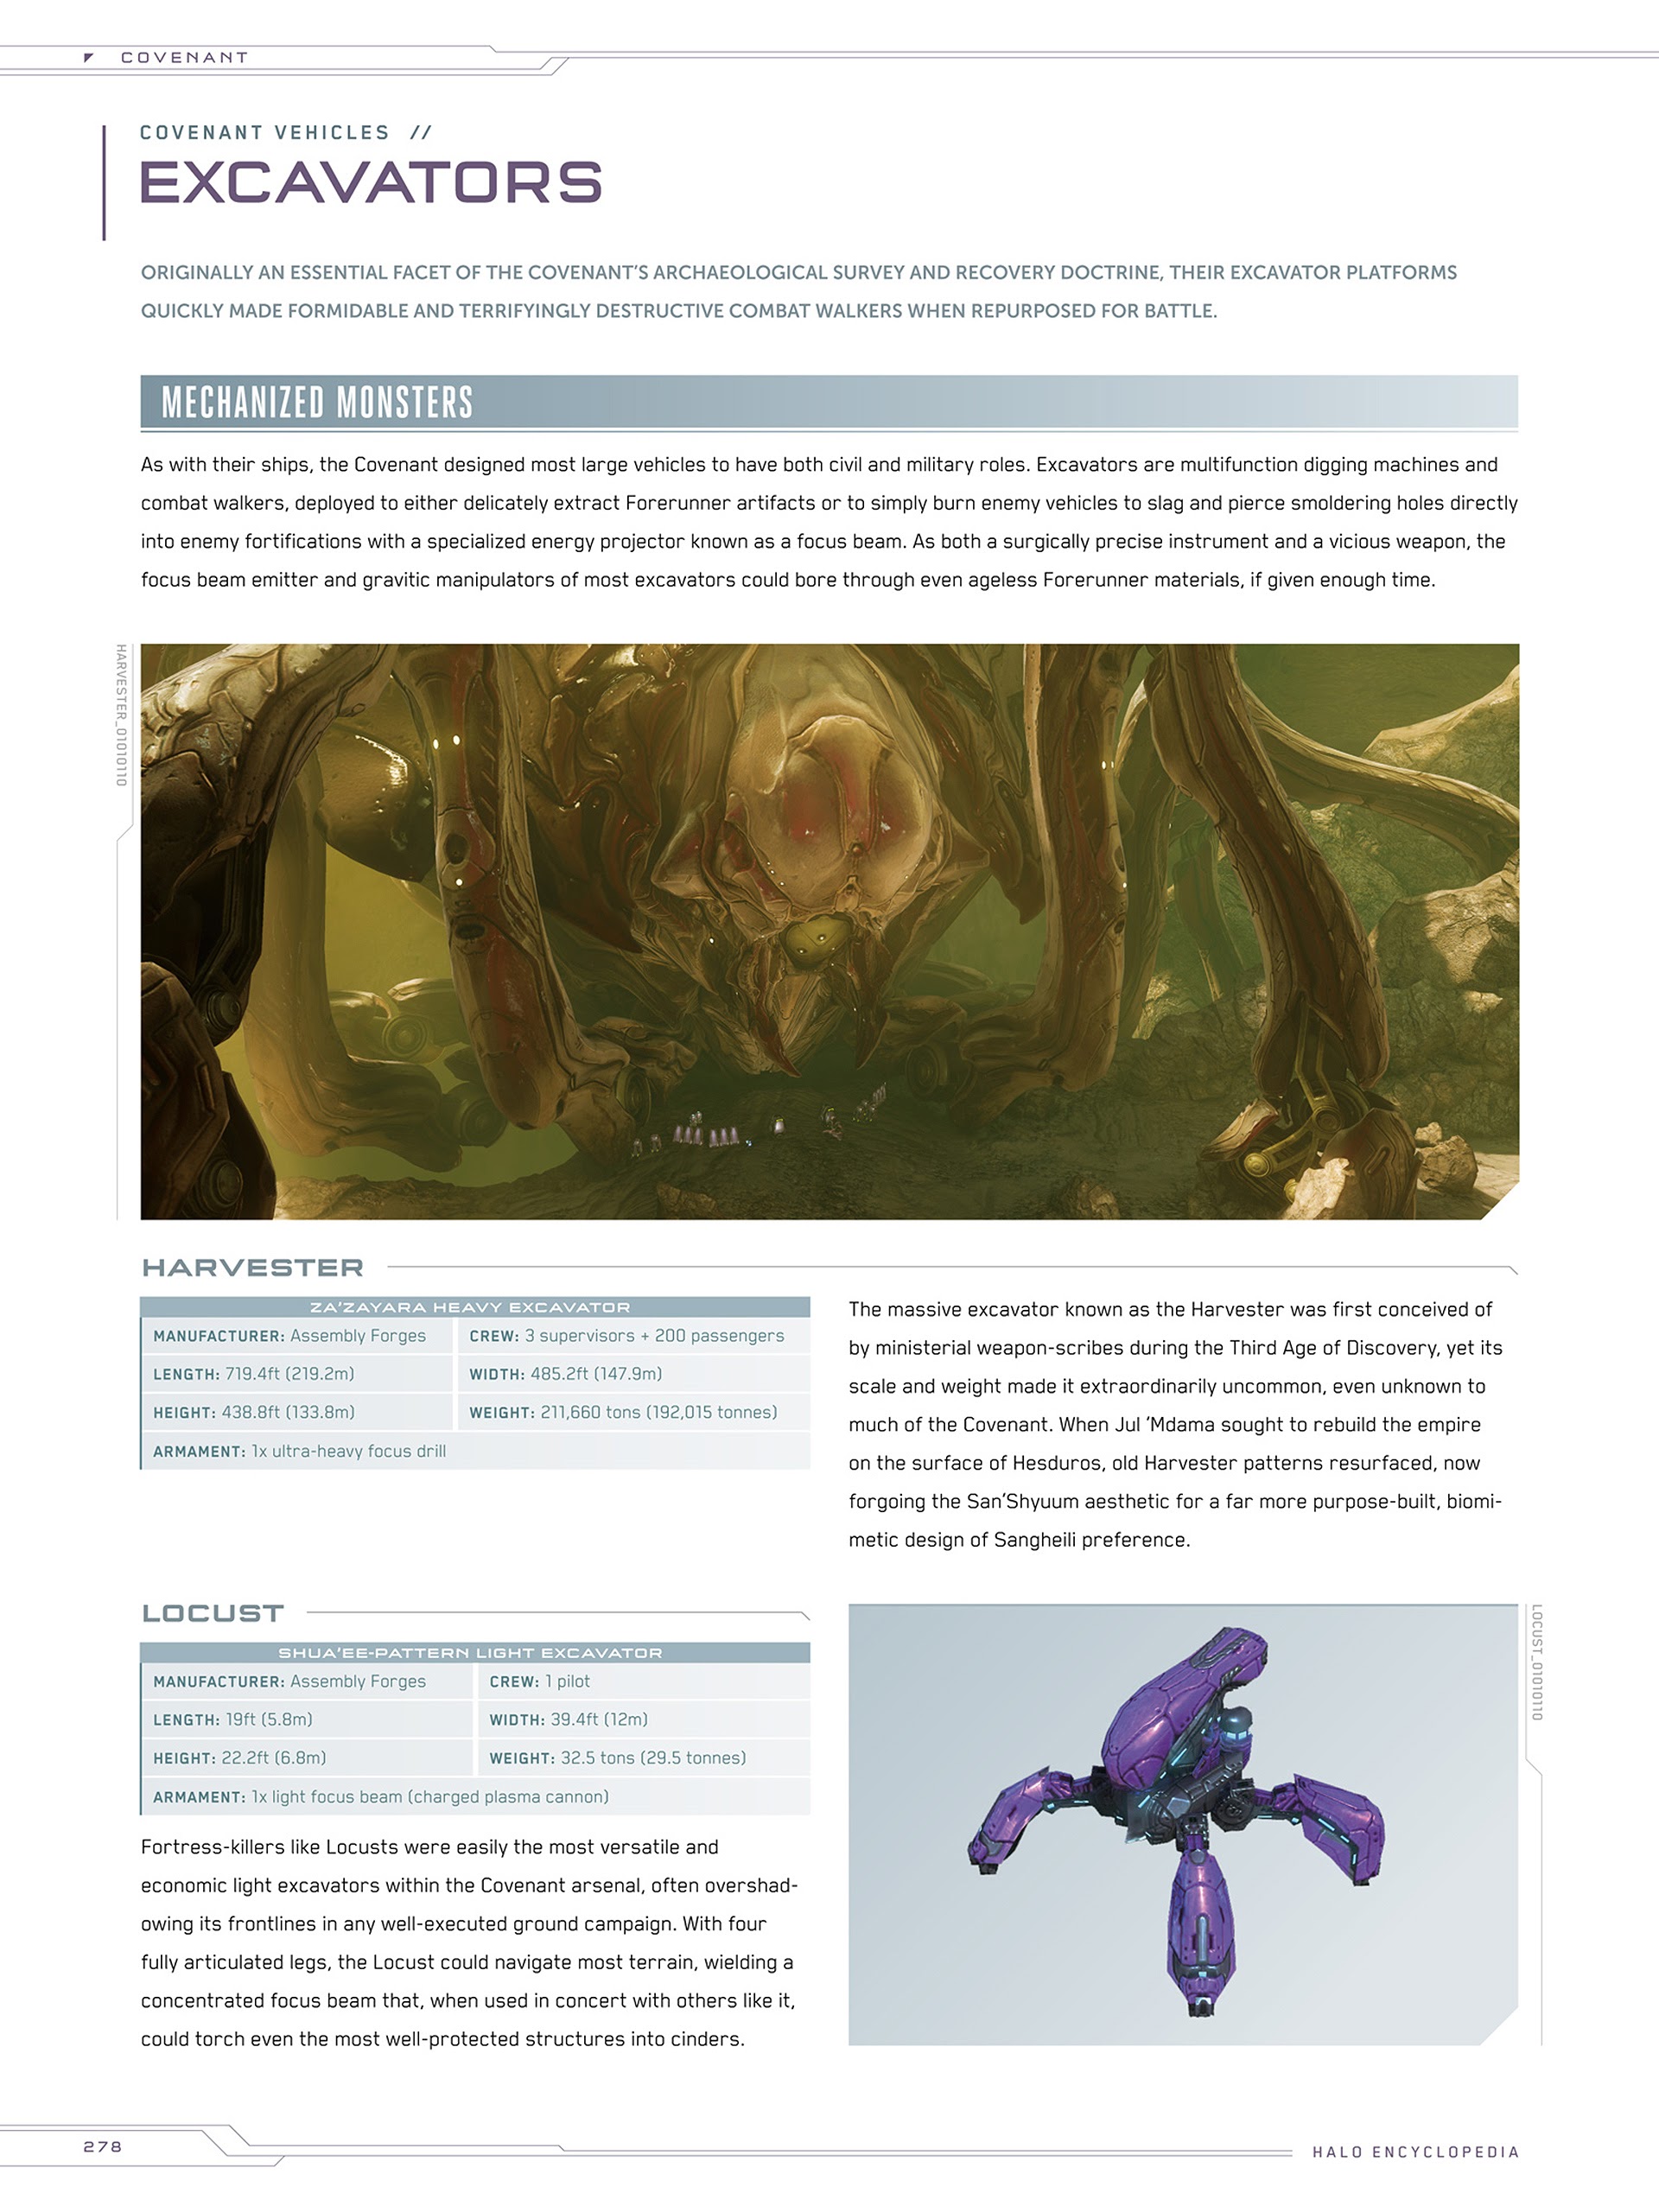 Read online Halo Encyclopedia comic -  Issue # TPB (Part 3) - 74